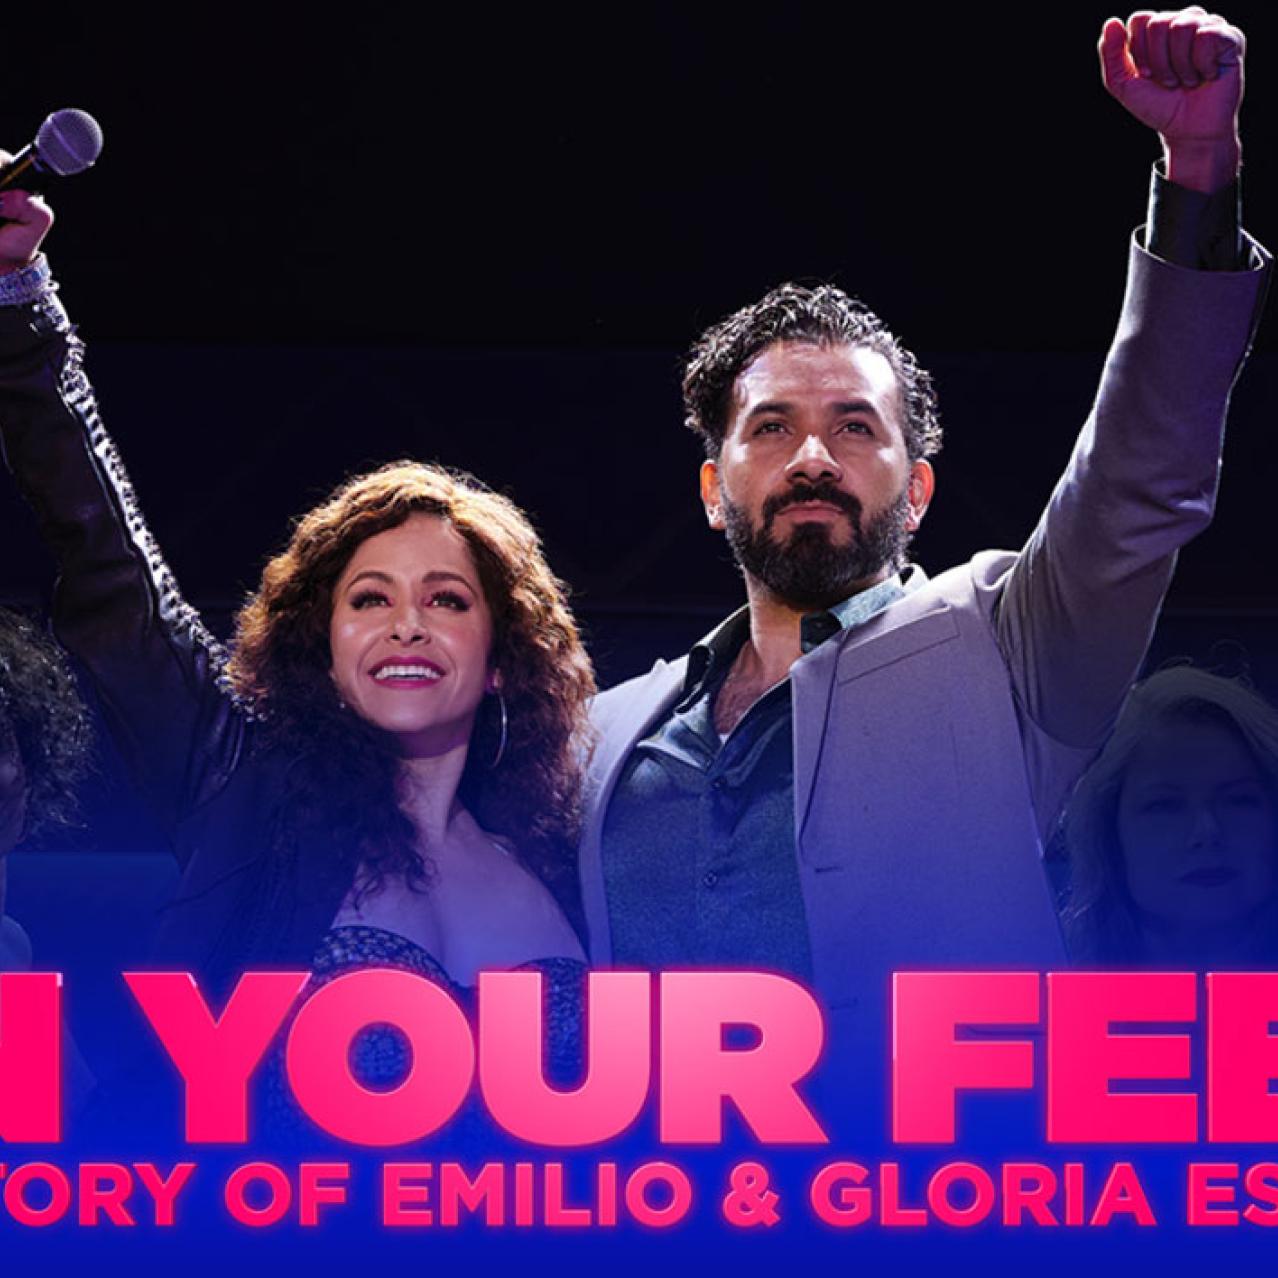 On Your Feet! The Story of Emilio & Gloria Estefan at Avalon Theatre